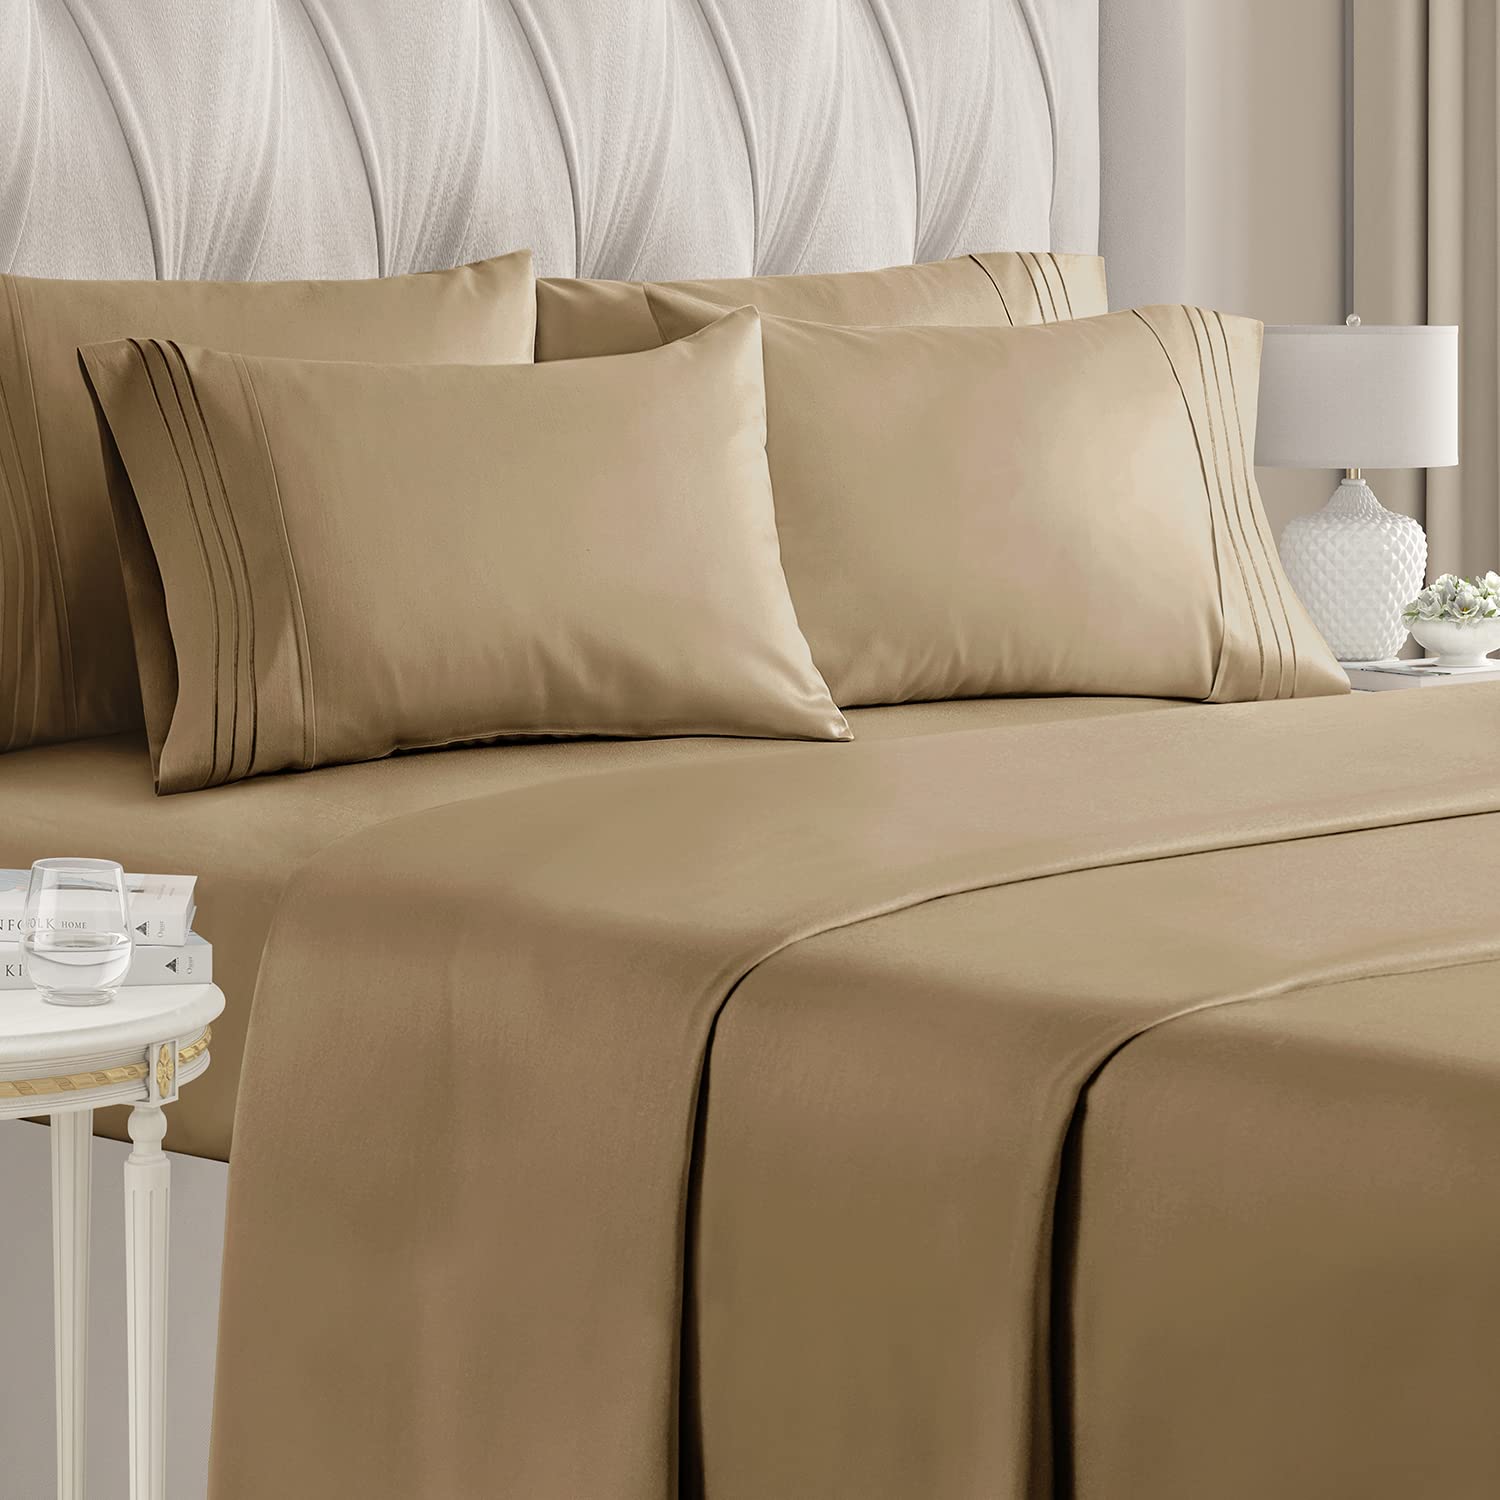 Book Cover Queen Size Sheet Set - 6 Piece Set - Hotel Luxury Bed Sheets - Extra Soft - Deep Pockets - Easy Fit - Breathable & Cooling Sheets - Wrinkle Free - Comfy - Tan - Beige Bed Sheets - Queens Sheets - 6 PC